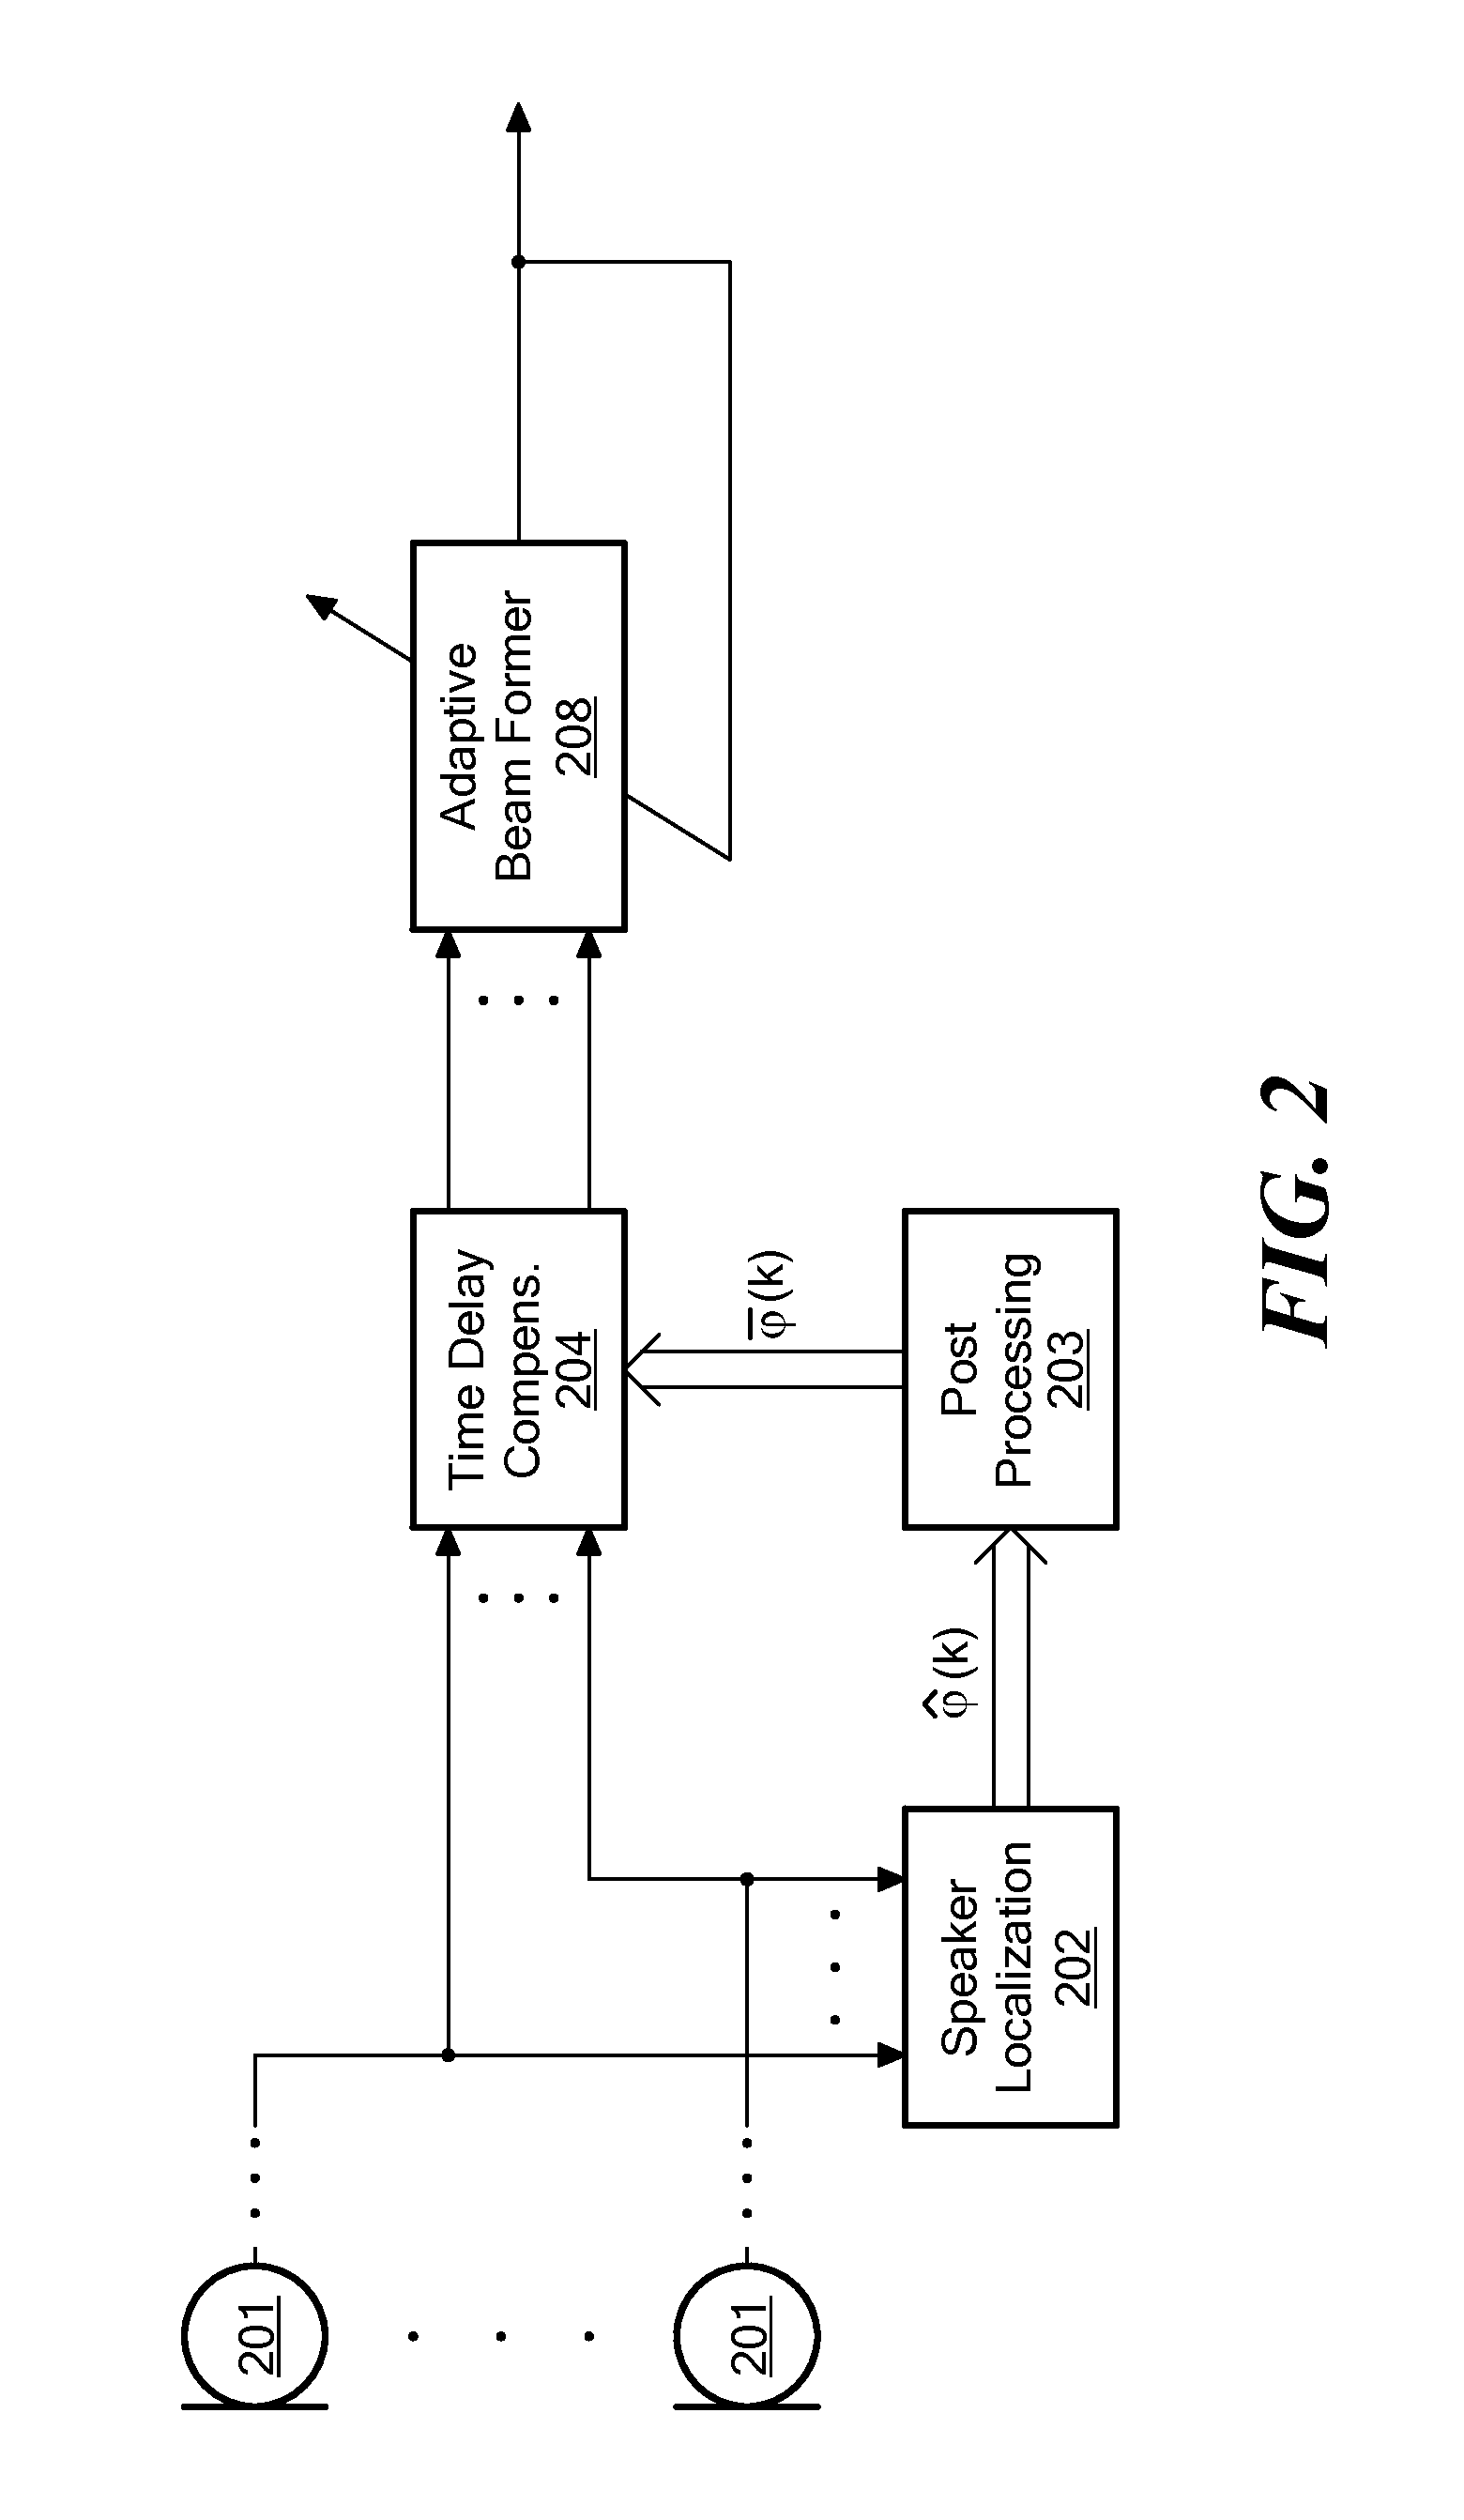 Method for Determining a Time Delay for Time Delay Compensation